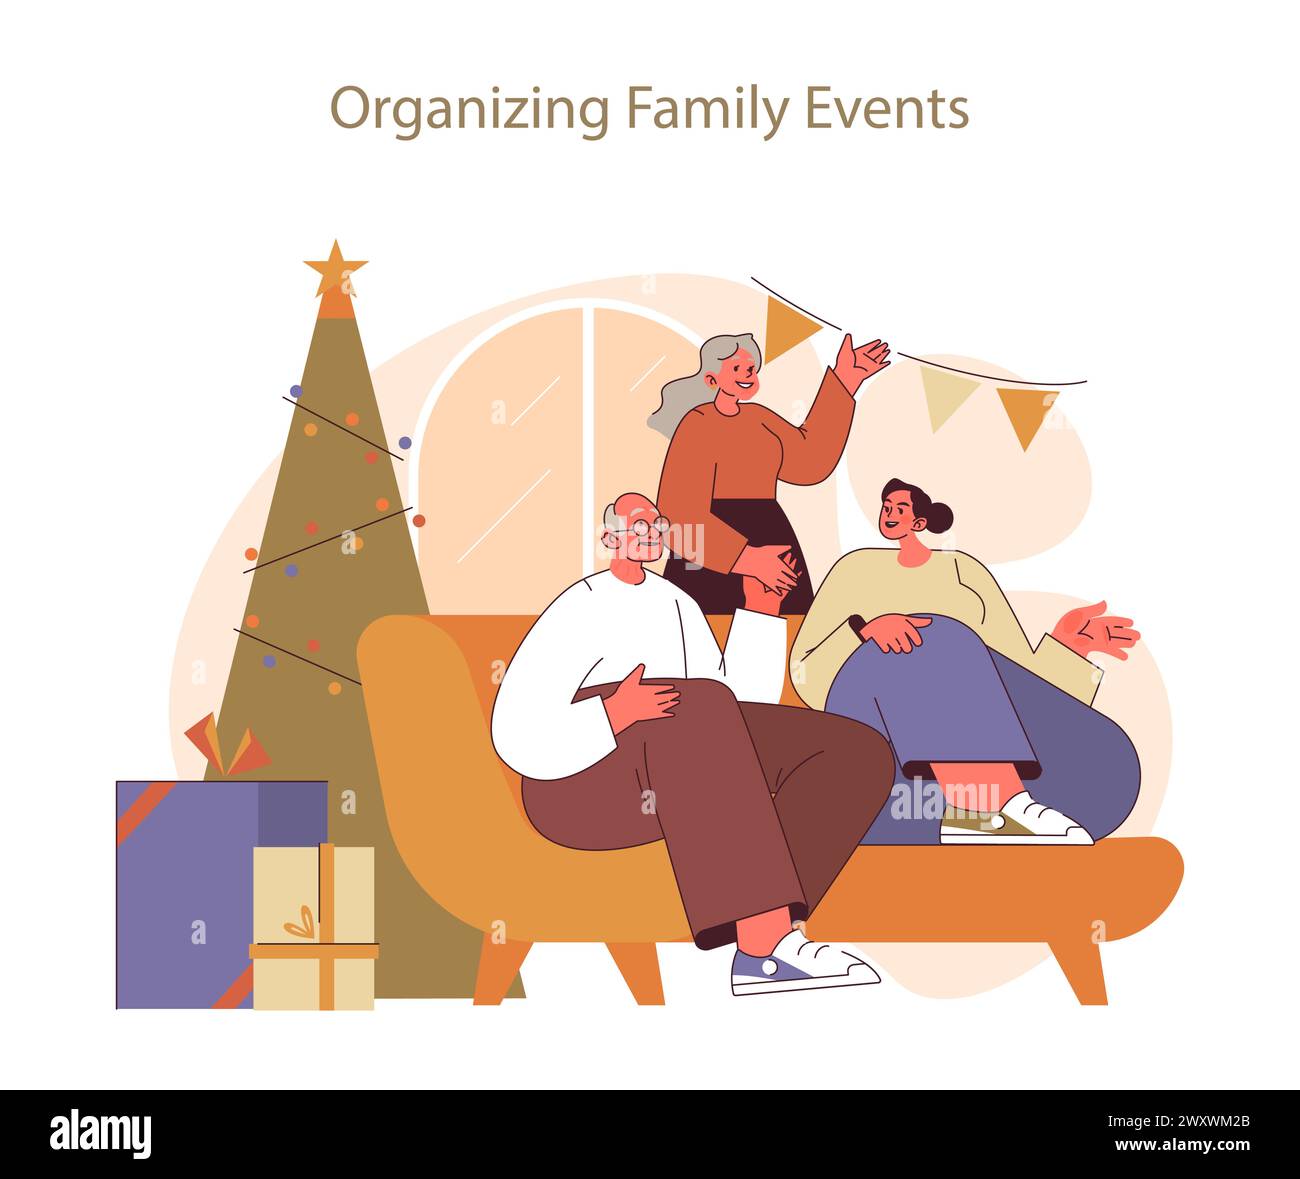 Organizing family events concept. Warm-hearted seniors preparing a festive home gathering, embodying the holiday spirit. Celebrating togetherness during special occasions. Stock Vector